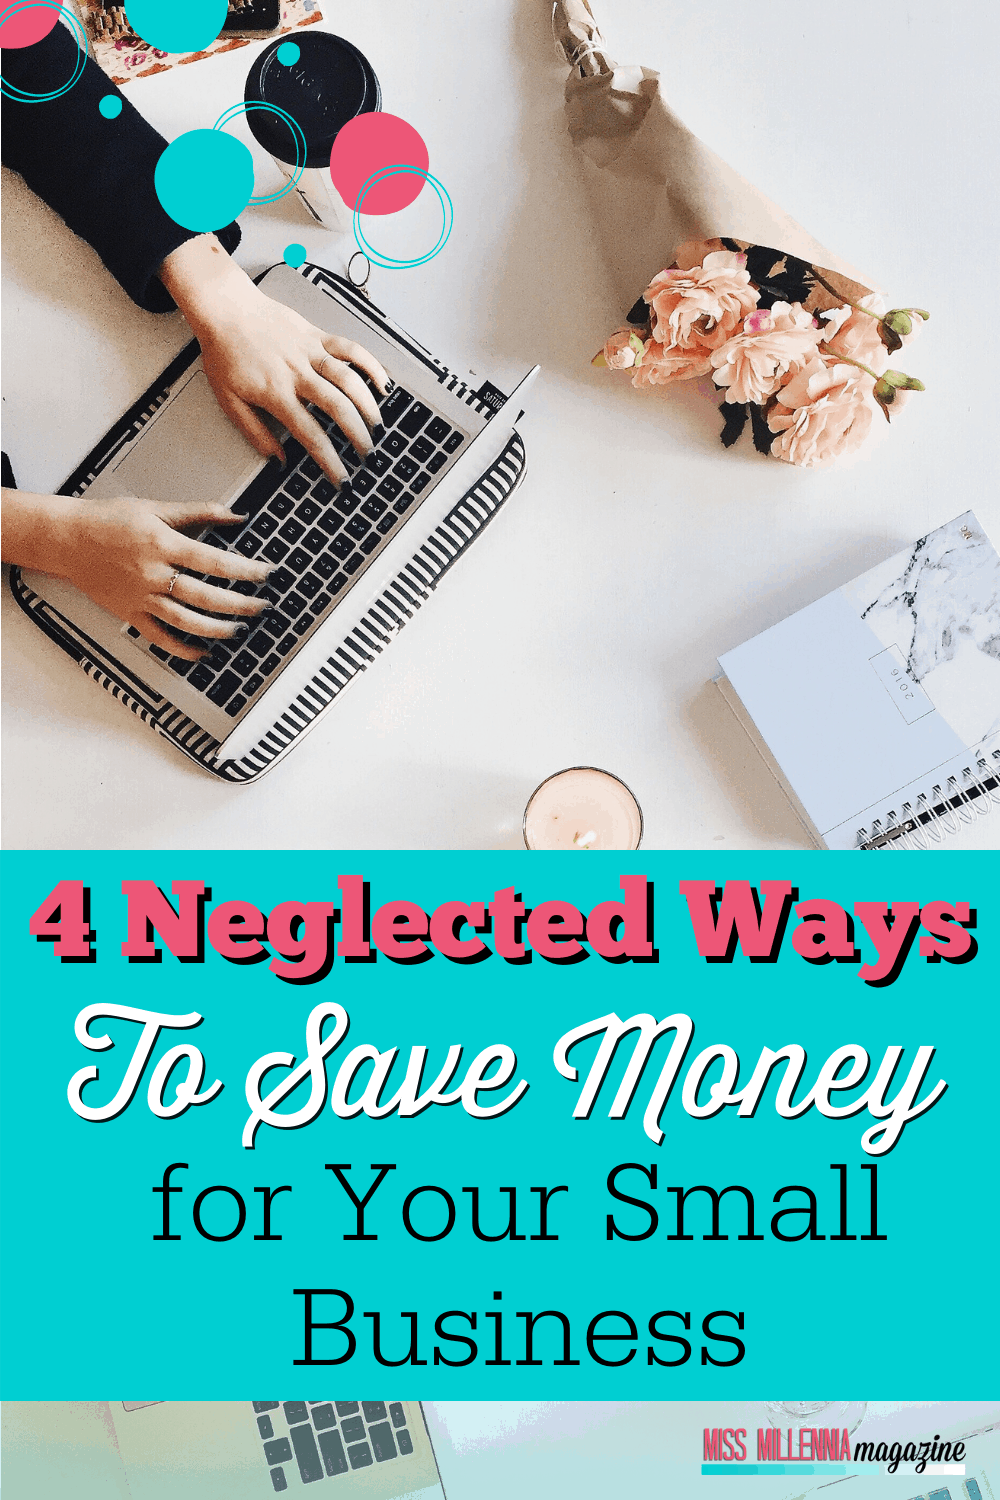 4 Neglected Ways To Save Money for Your Small Business